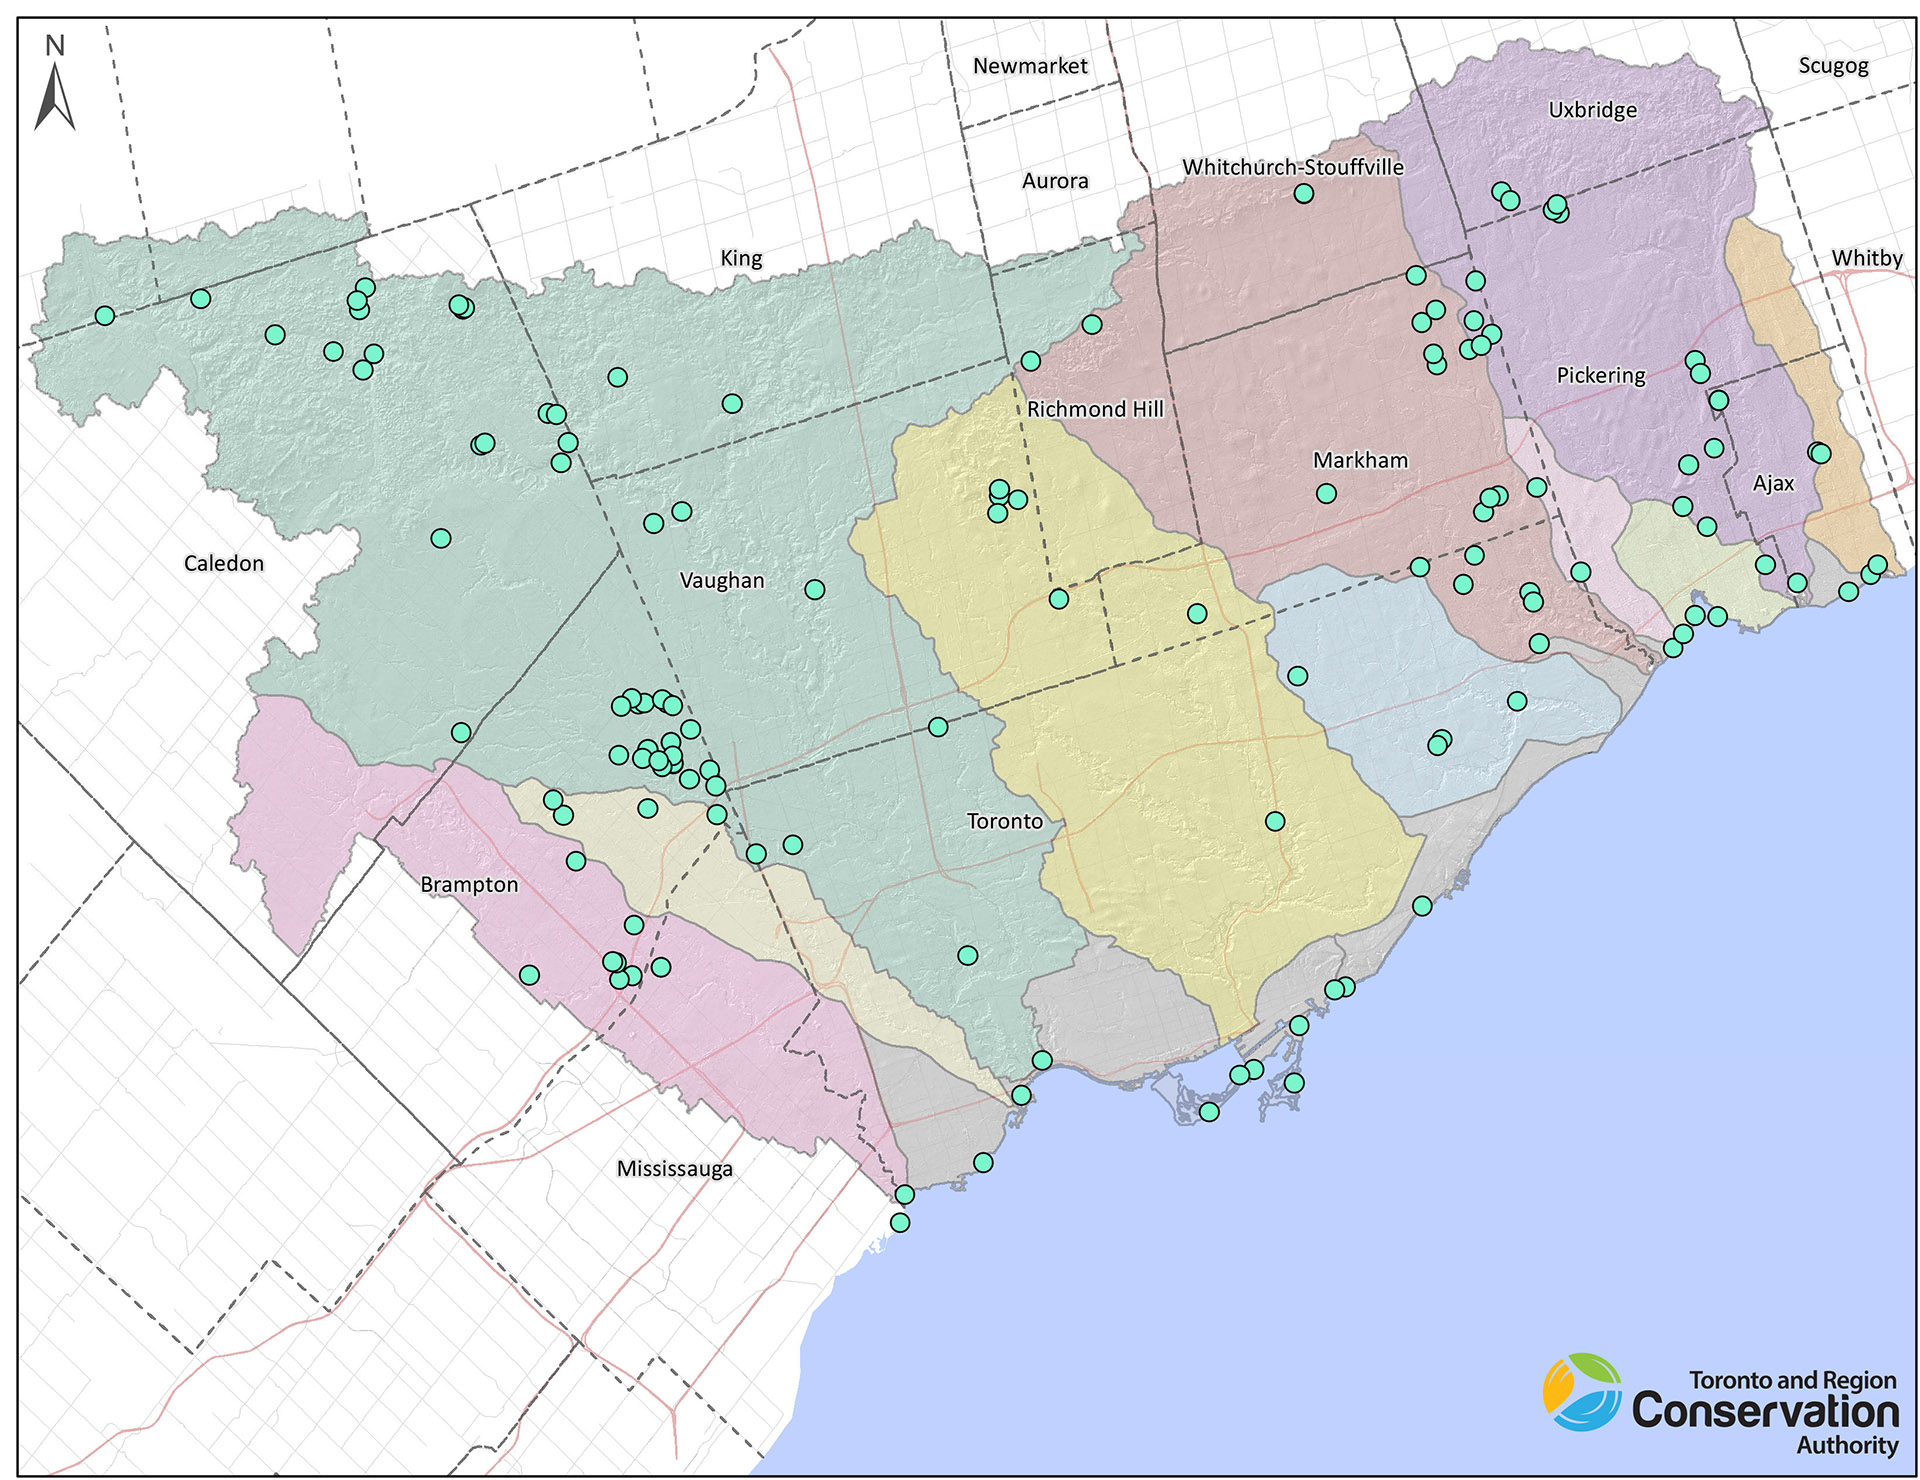 TRCA restoration projects map